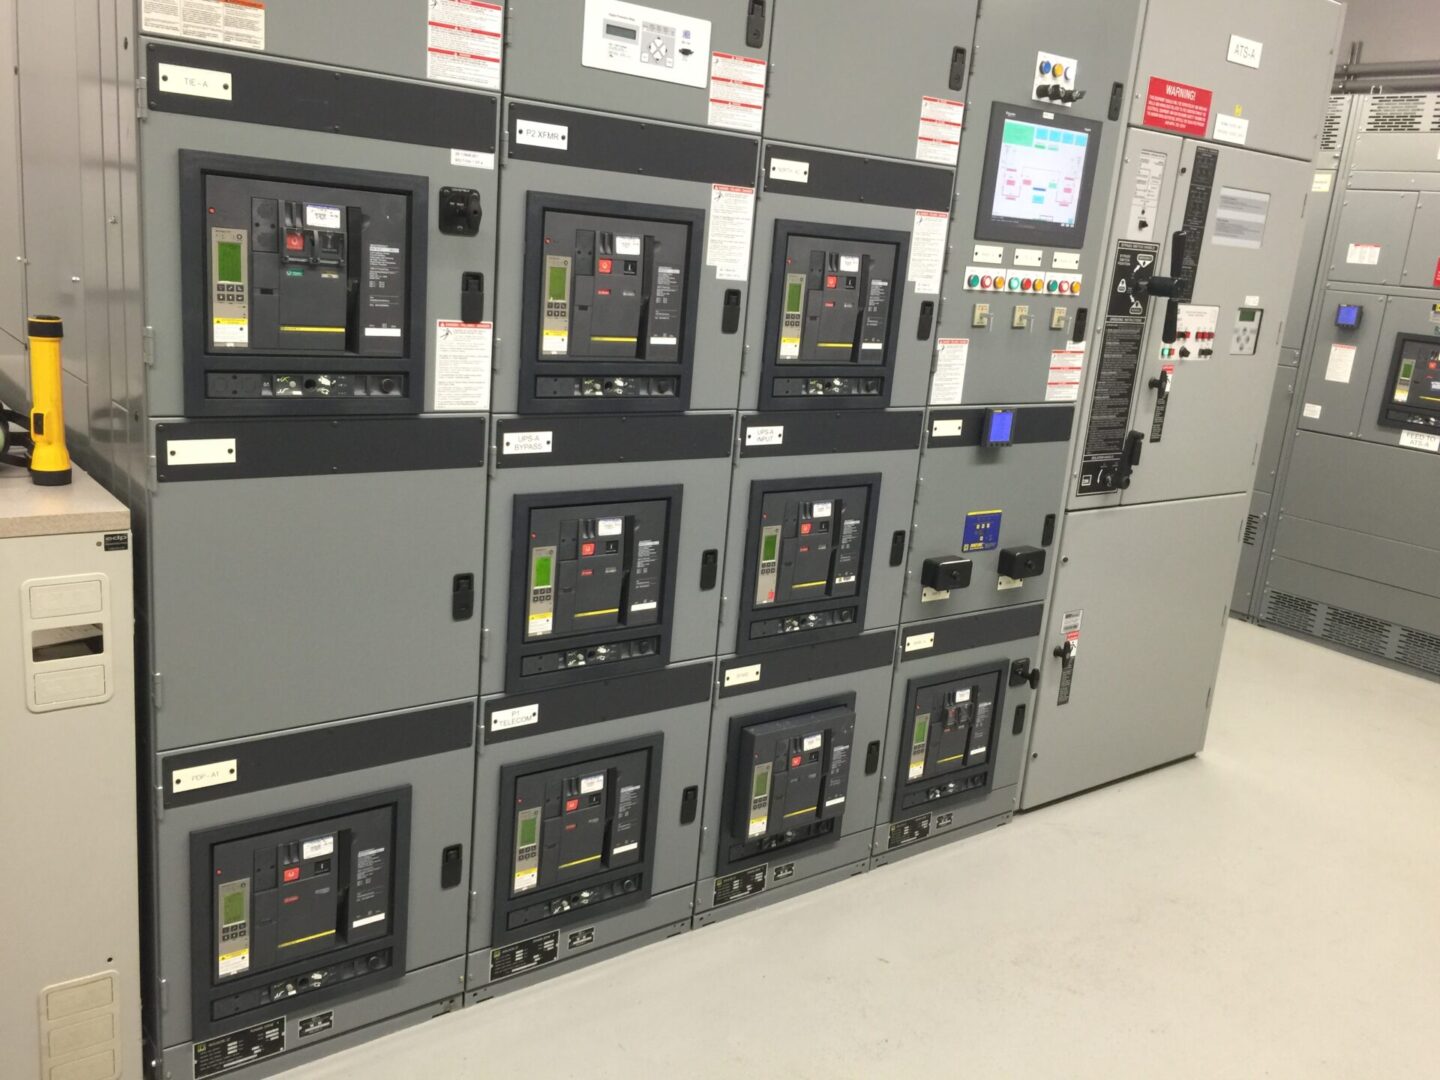 Wall-sized breaker and control panel equipment